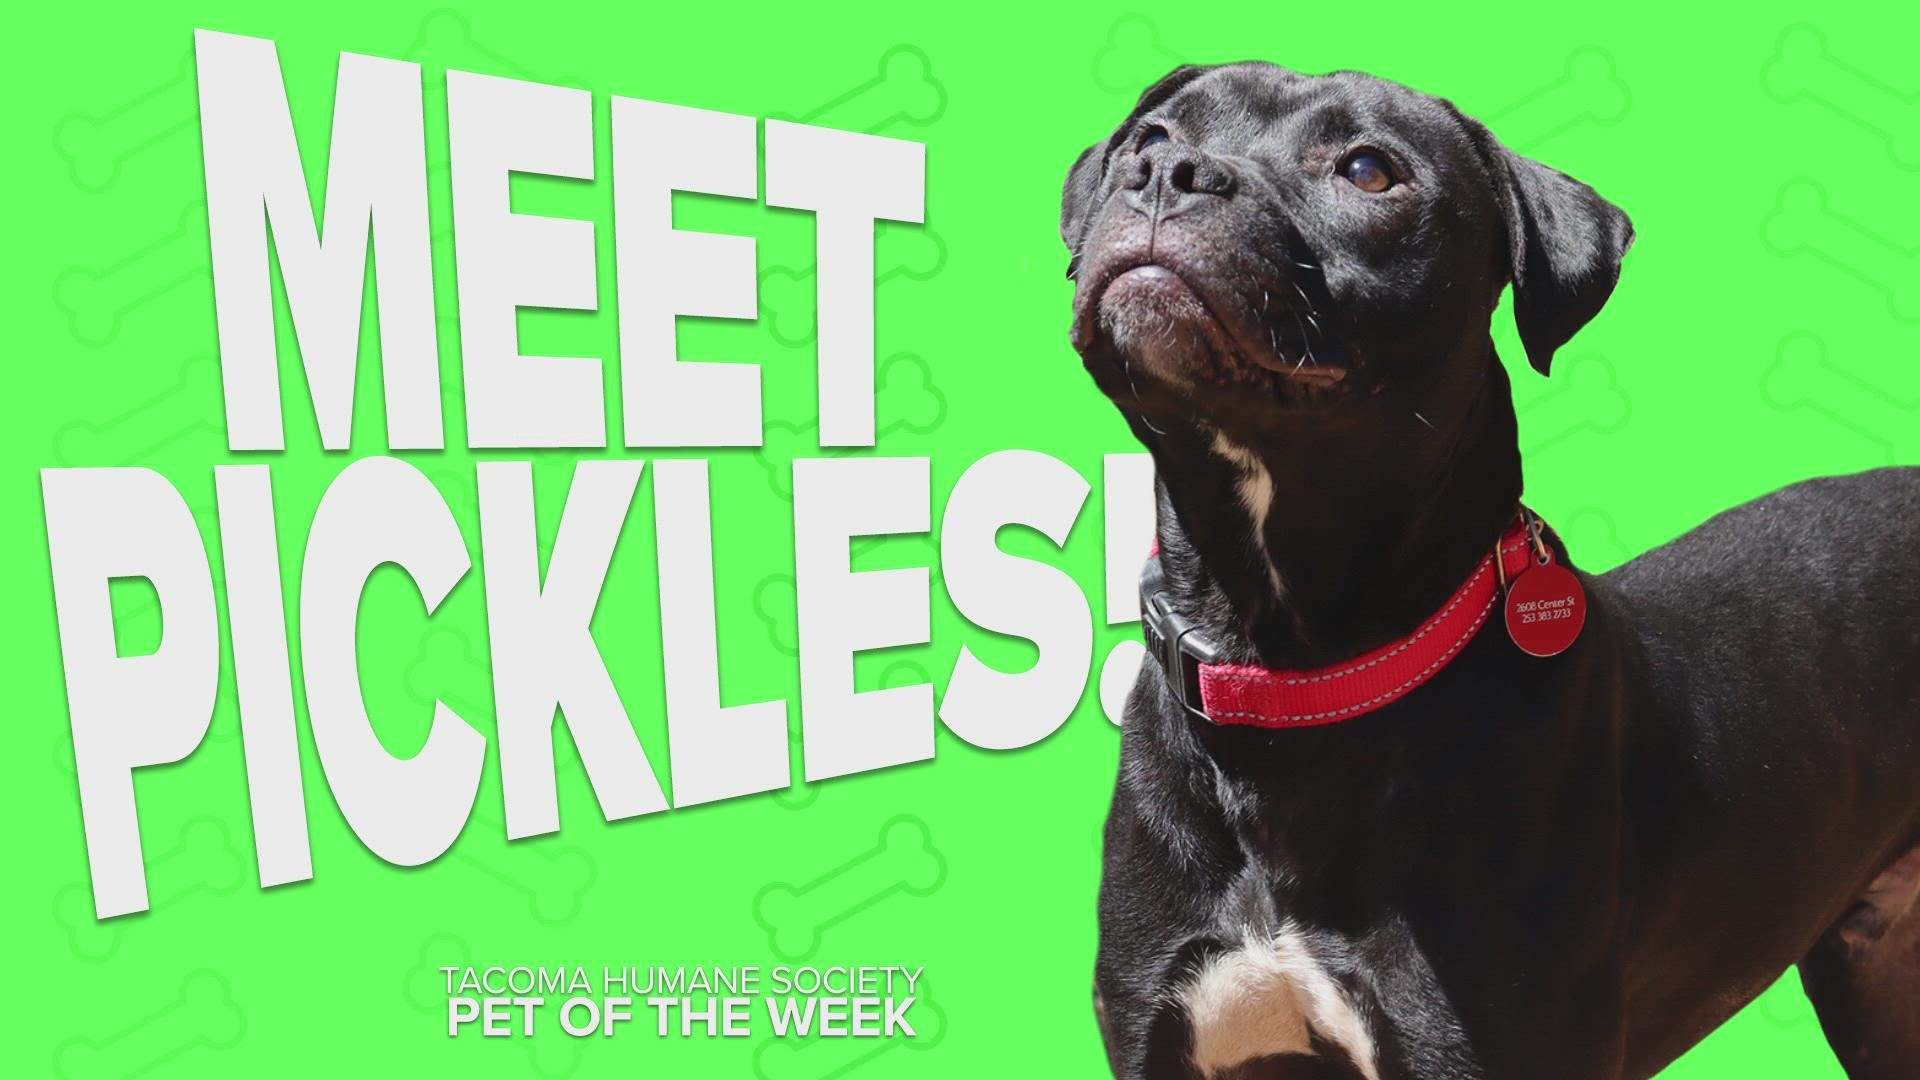 This week's featured pet rescue is Pickles!